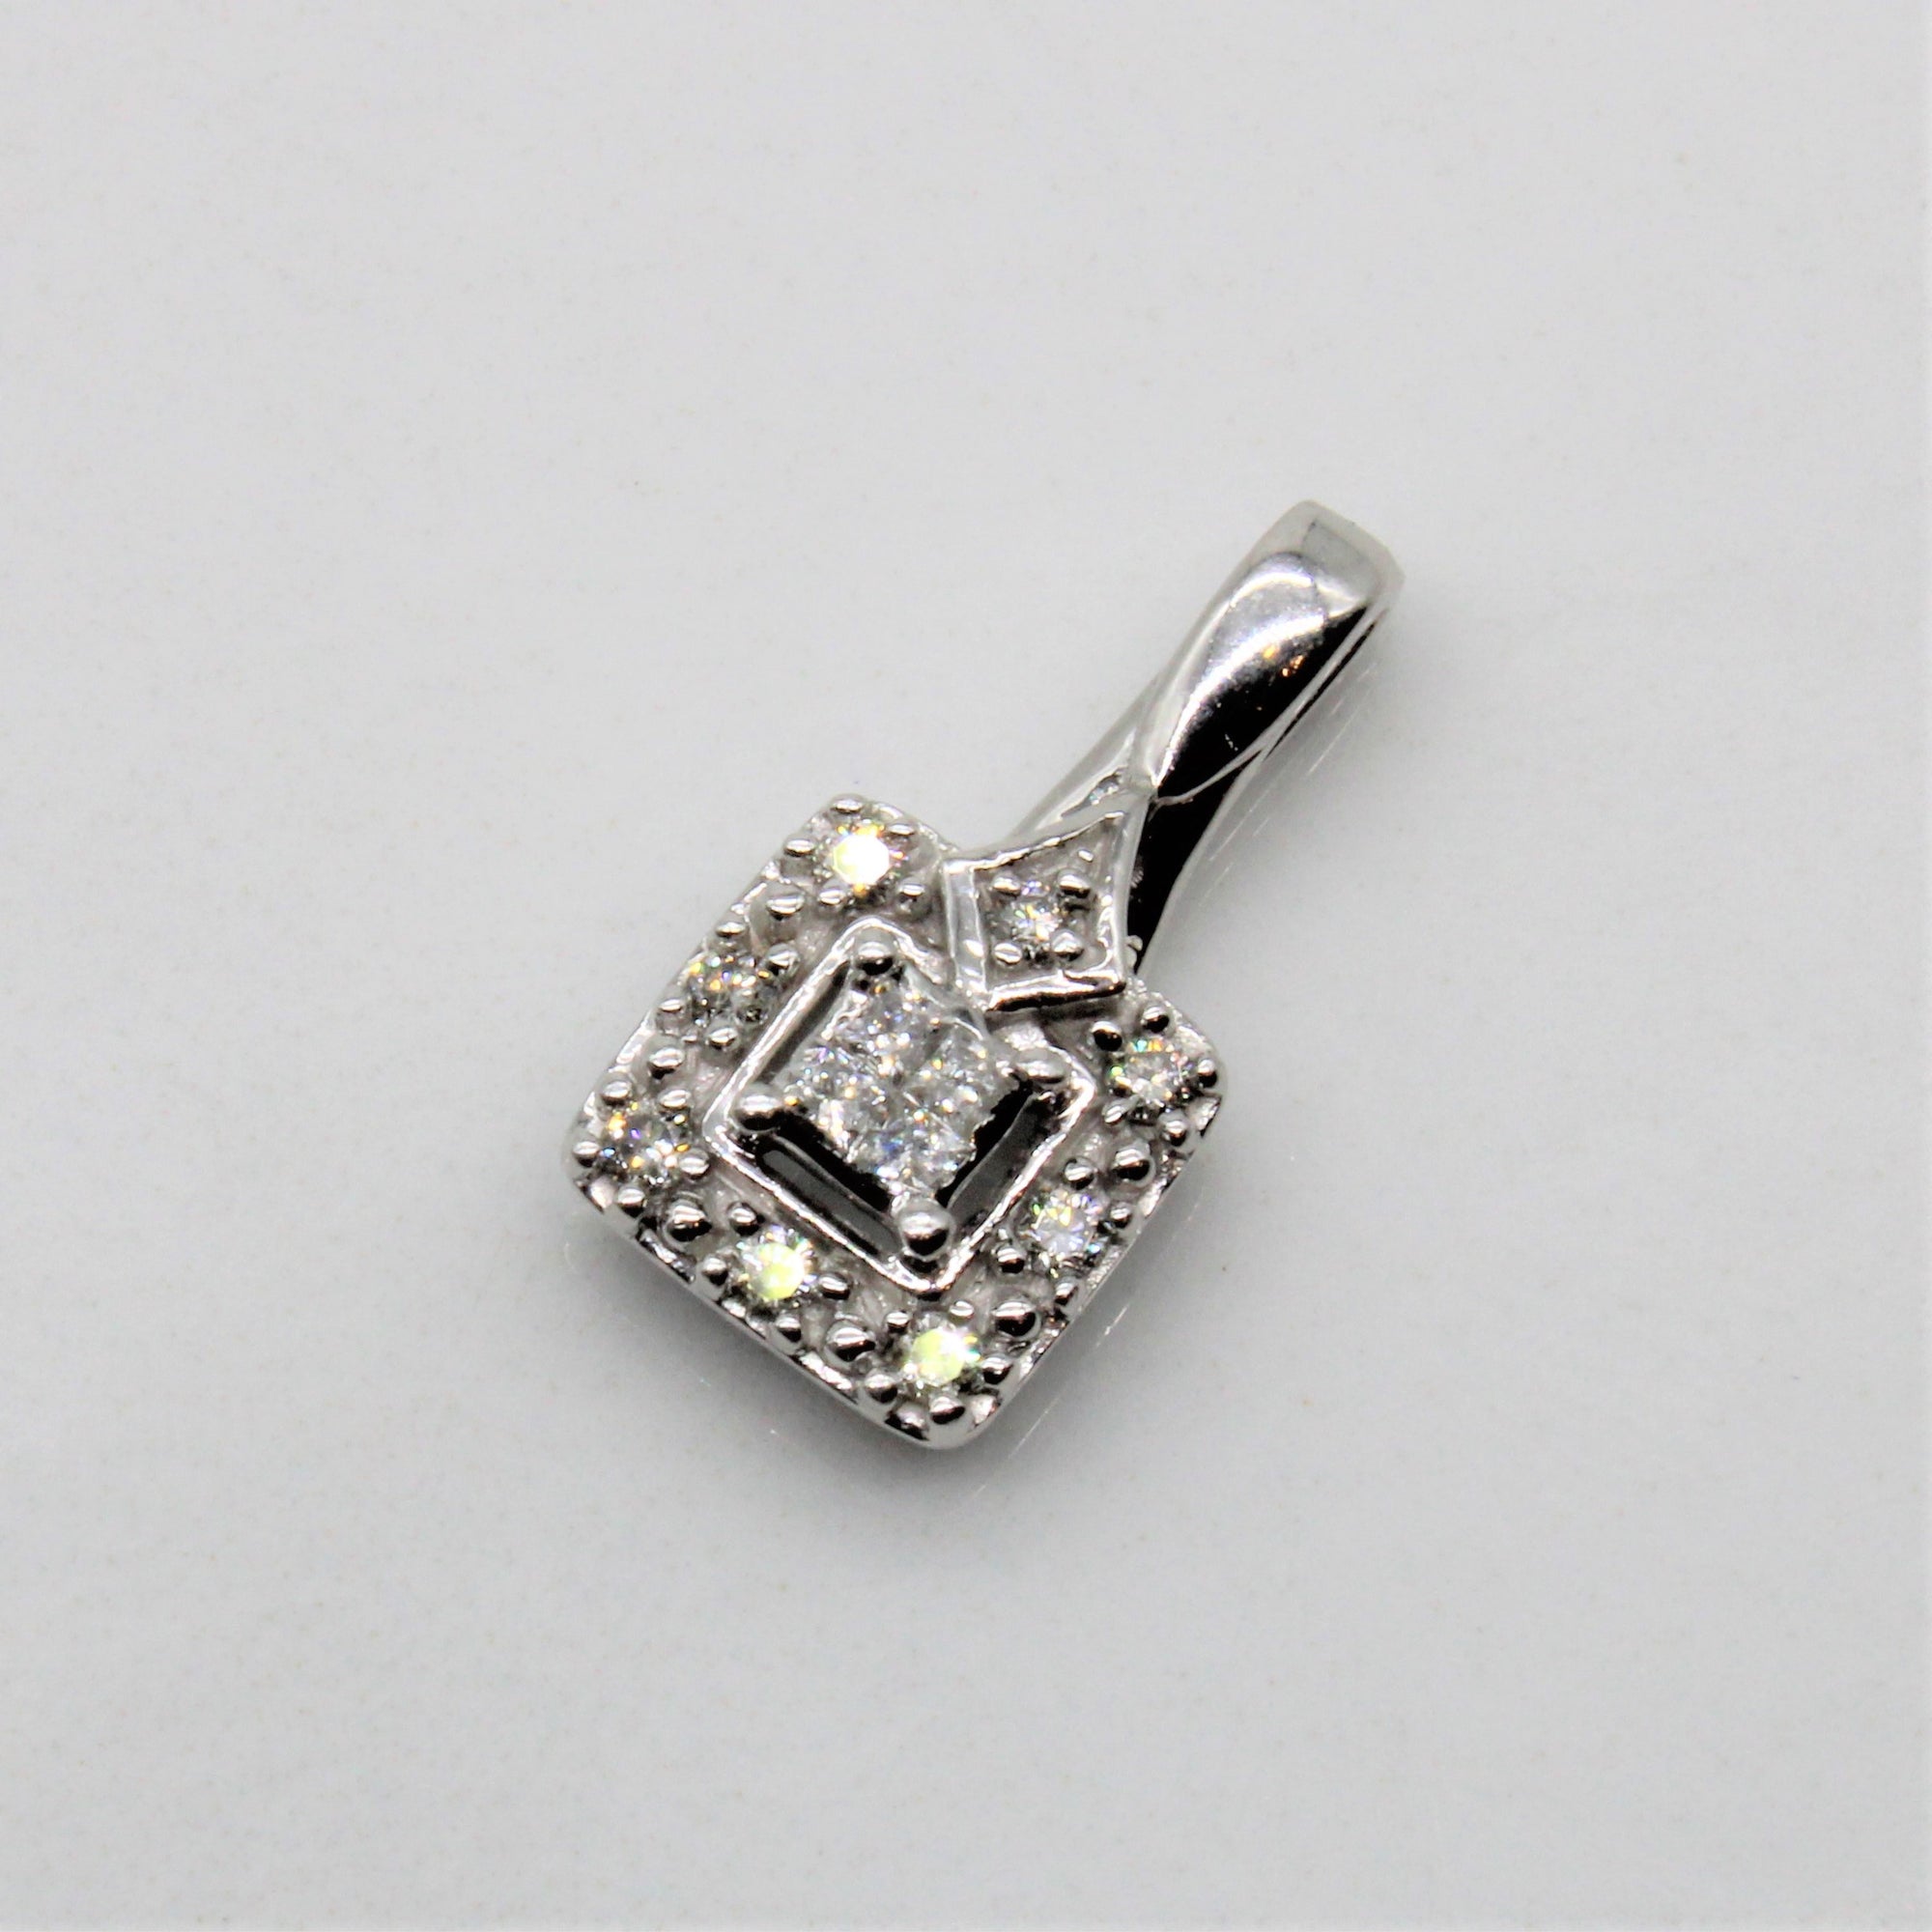 Diamond Cluster Pendant With Sapphire Detail | 0.15ctw, 0.01ct |